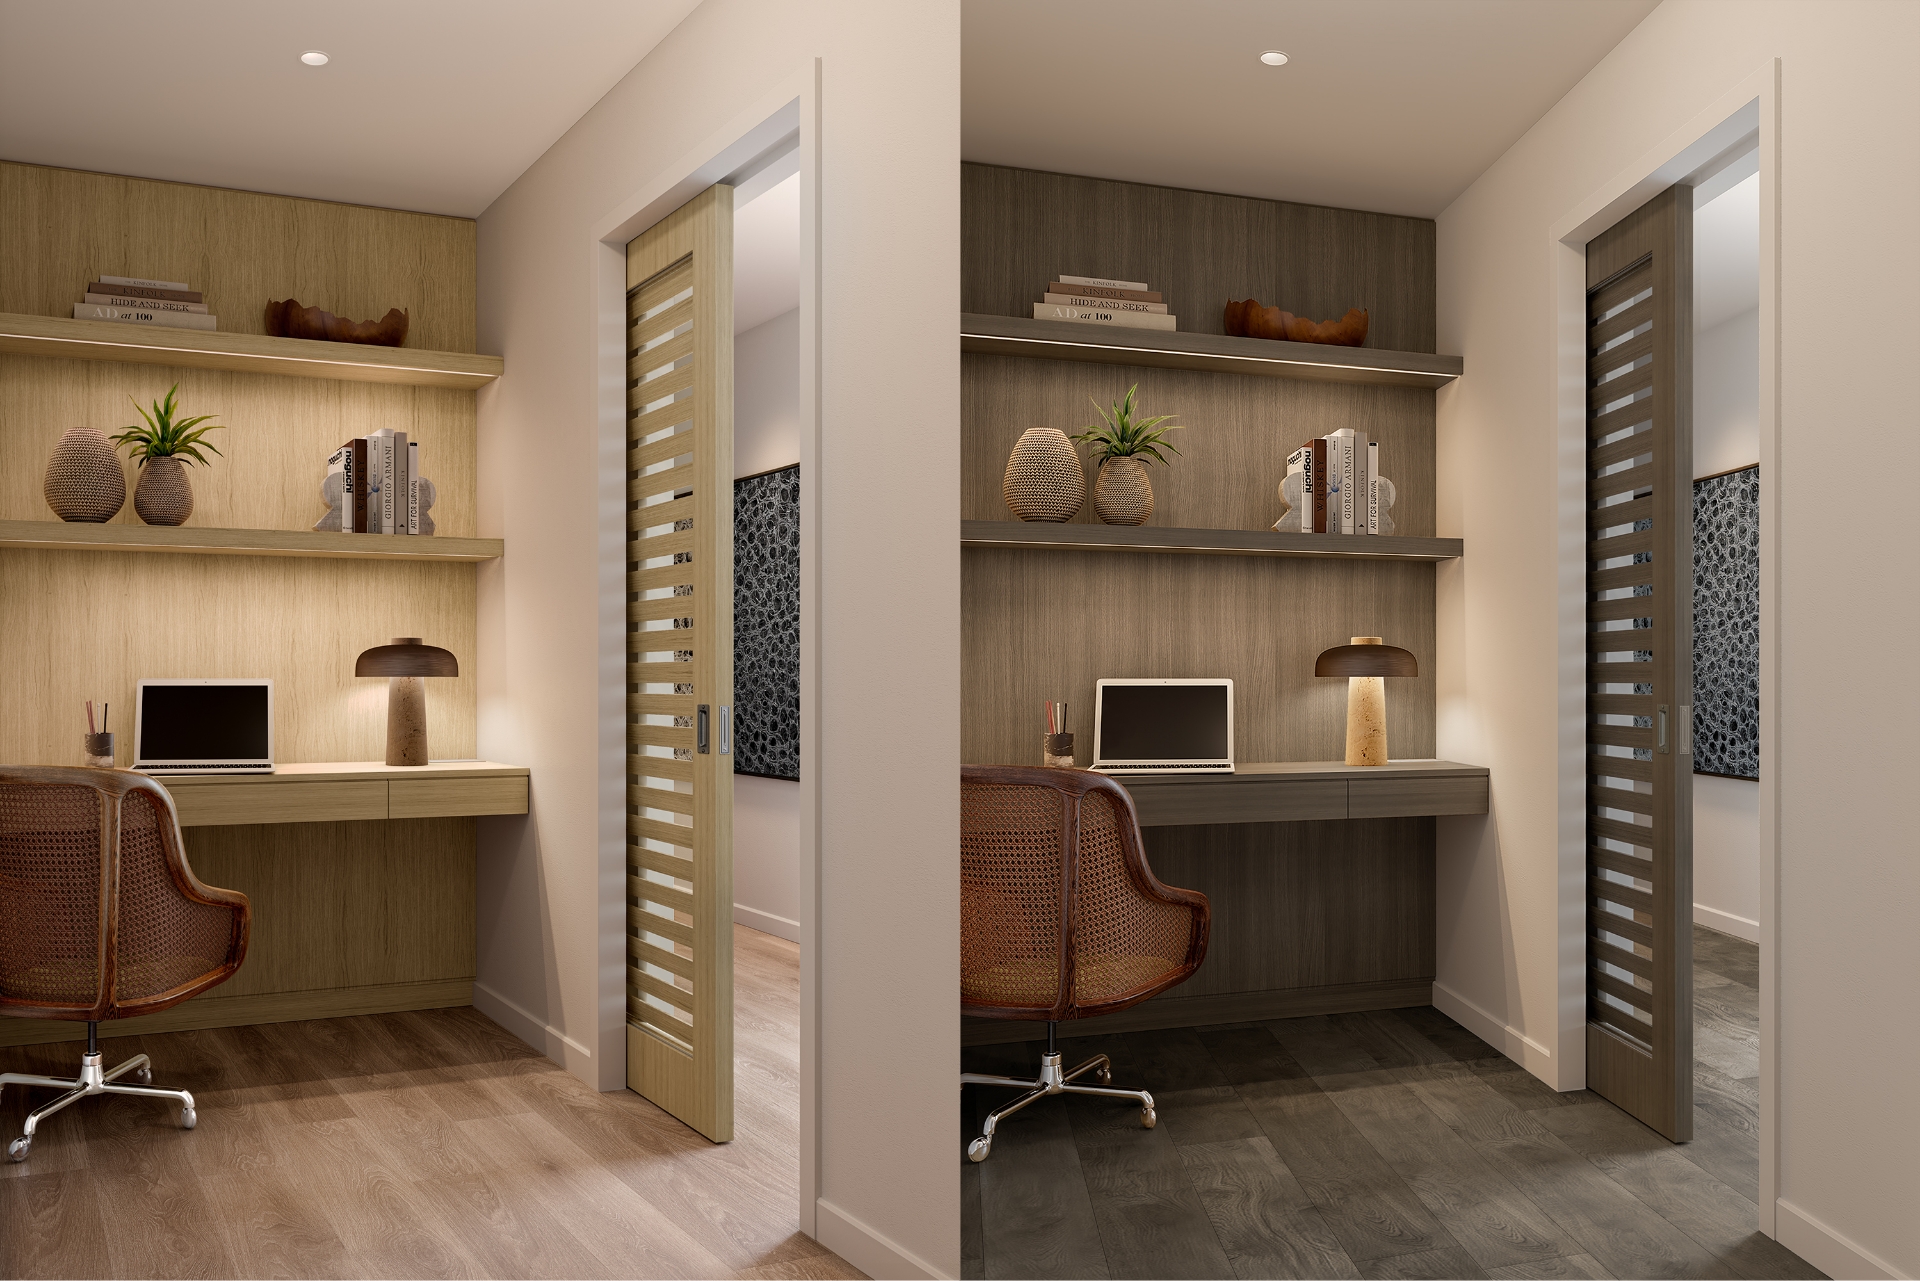 Side by side view of the integrated office feature in a light and dark color scheme comparison.